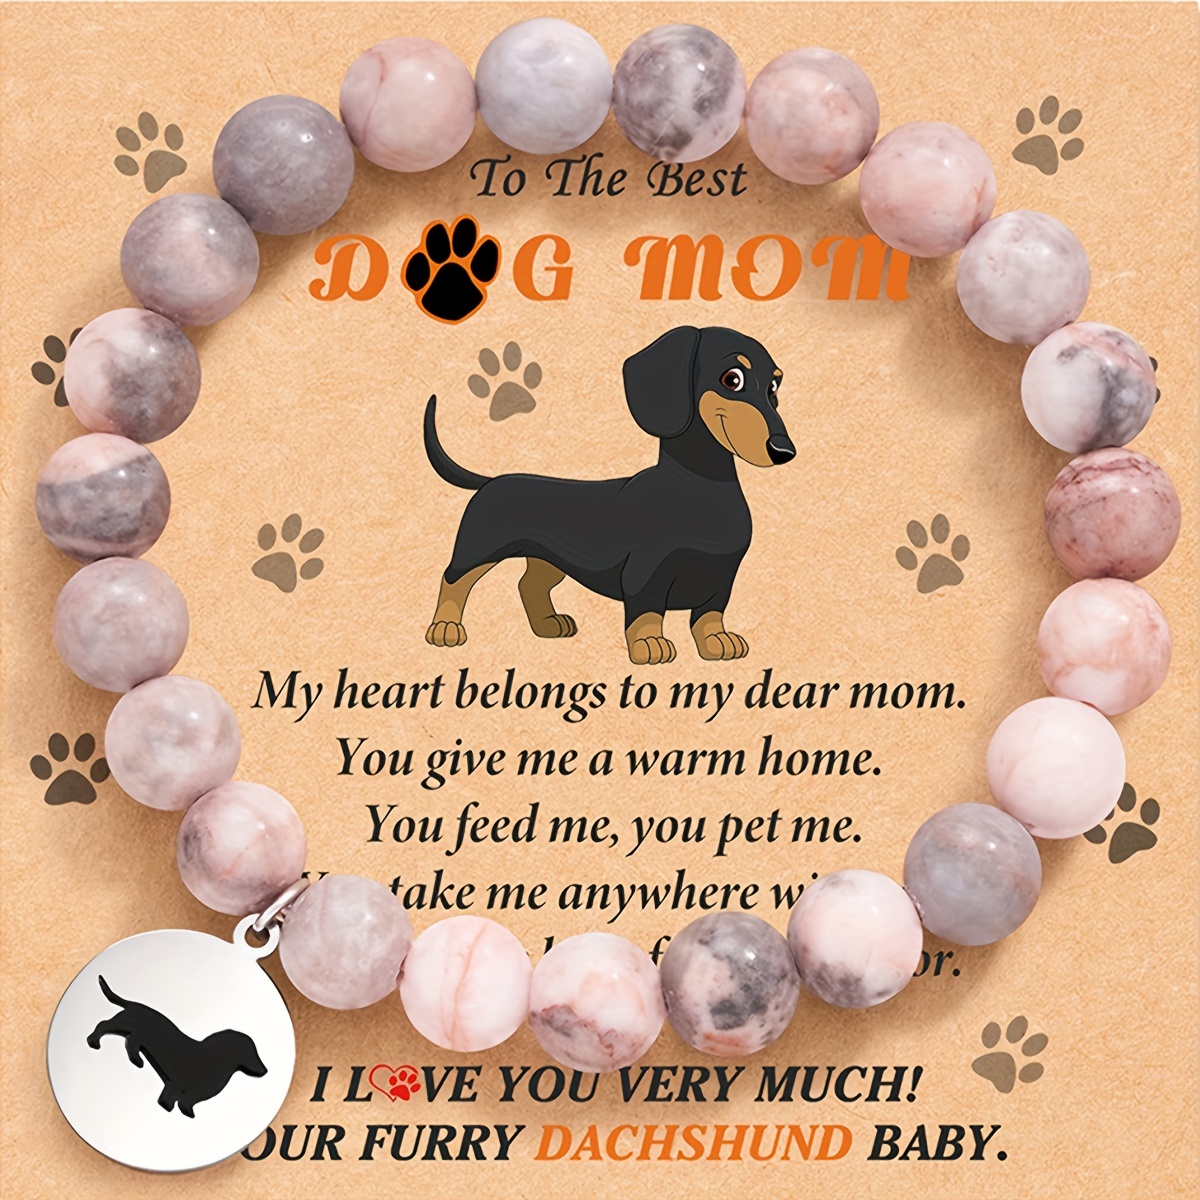 Mother's Day Gifts for Dog Moms: 20 Heart-touching Ideas That Rock